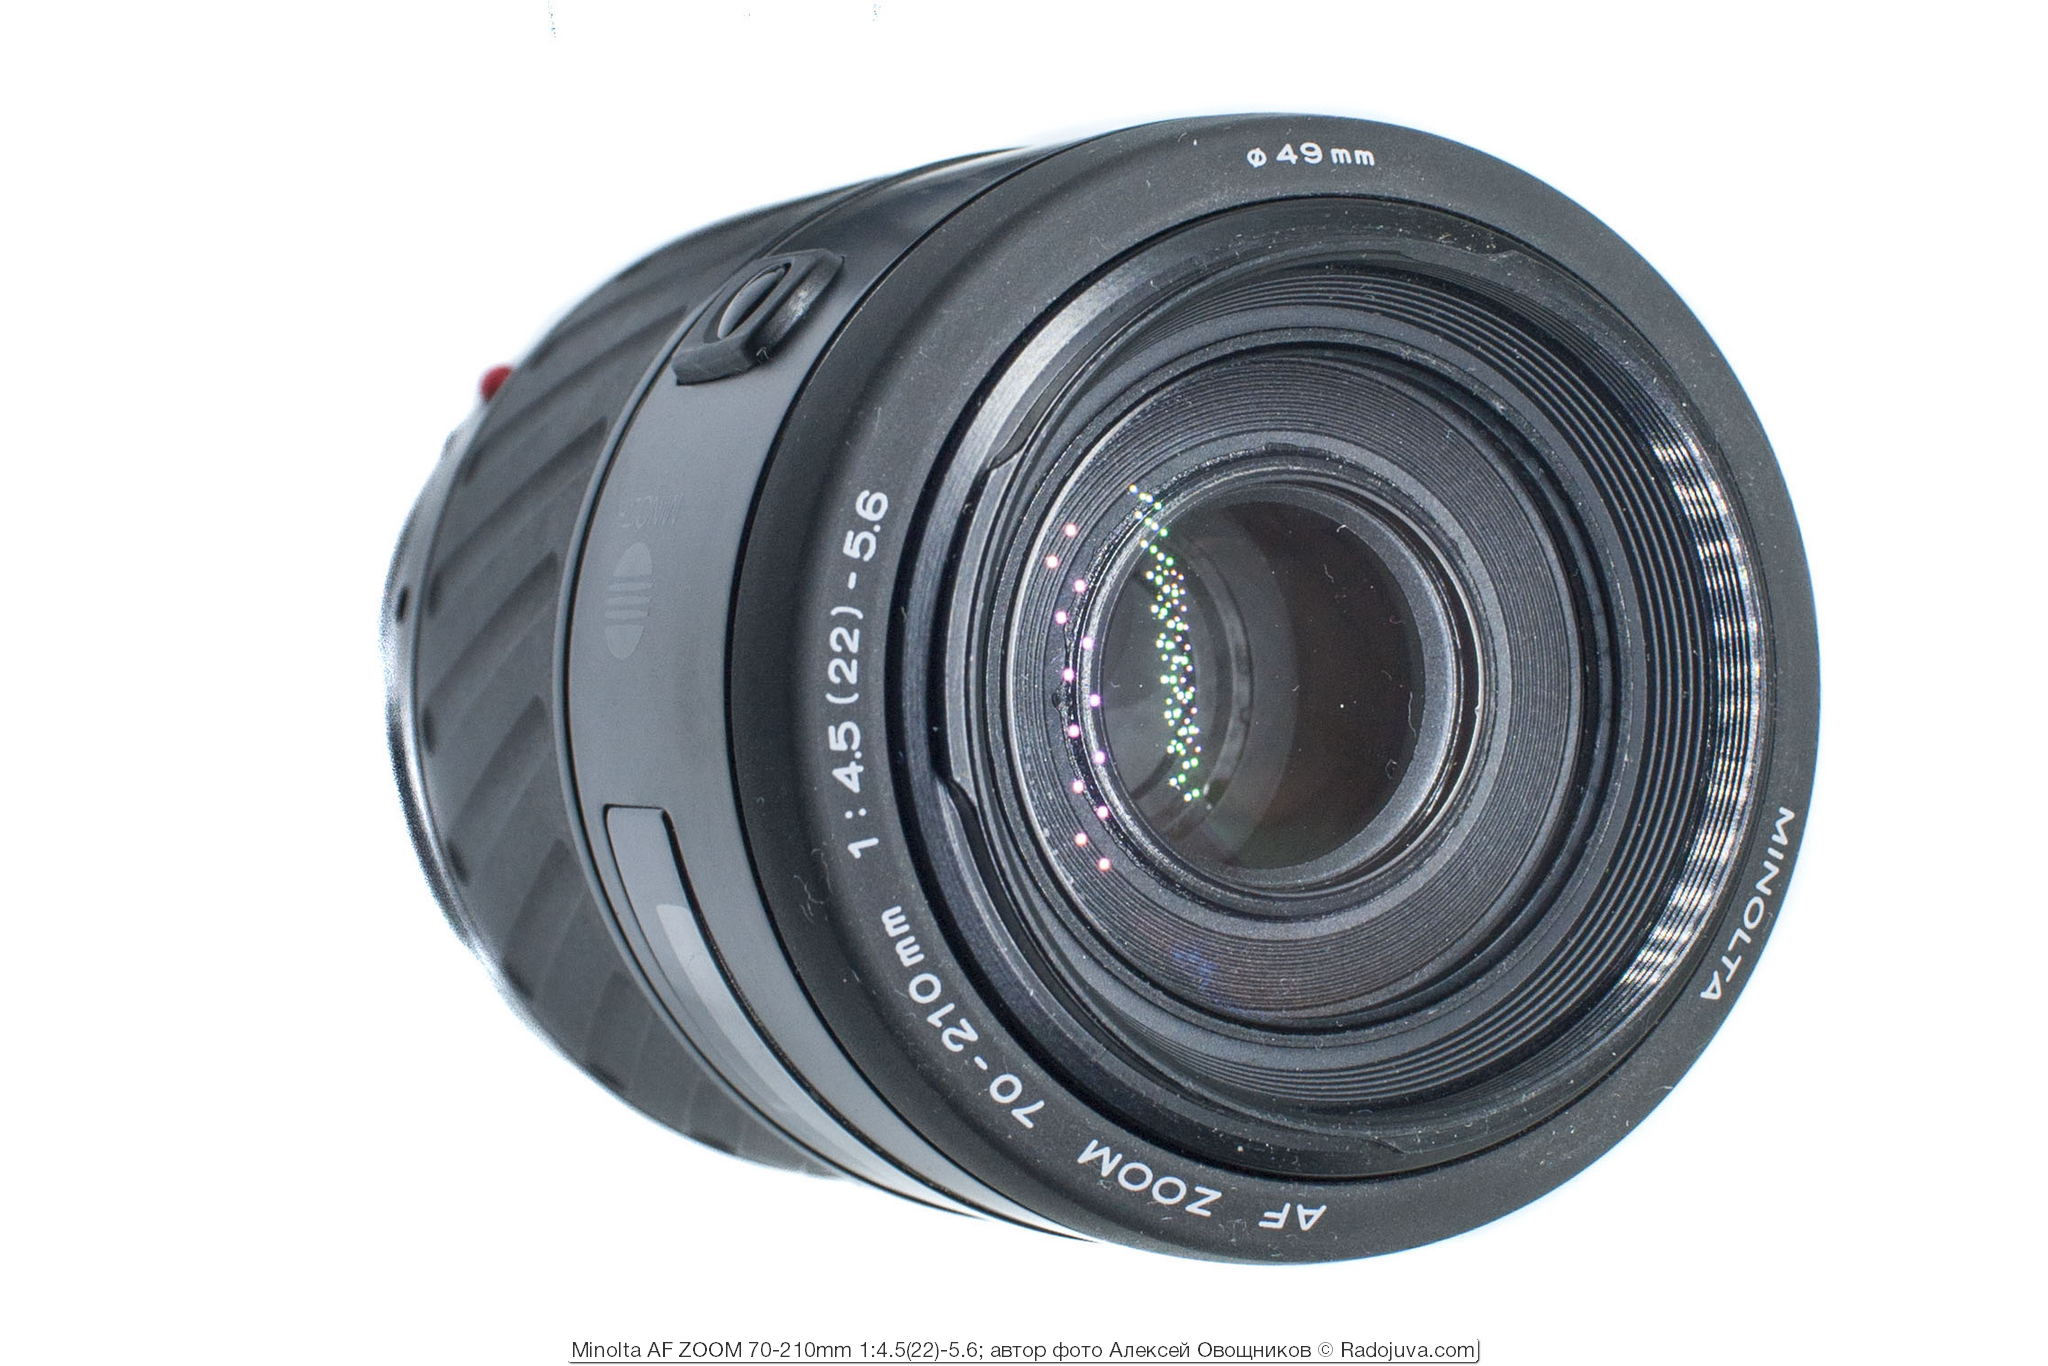 Minolta AF ZOOM 70-210mm 1: 4.5 (22) -5.6. Review from the reader